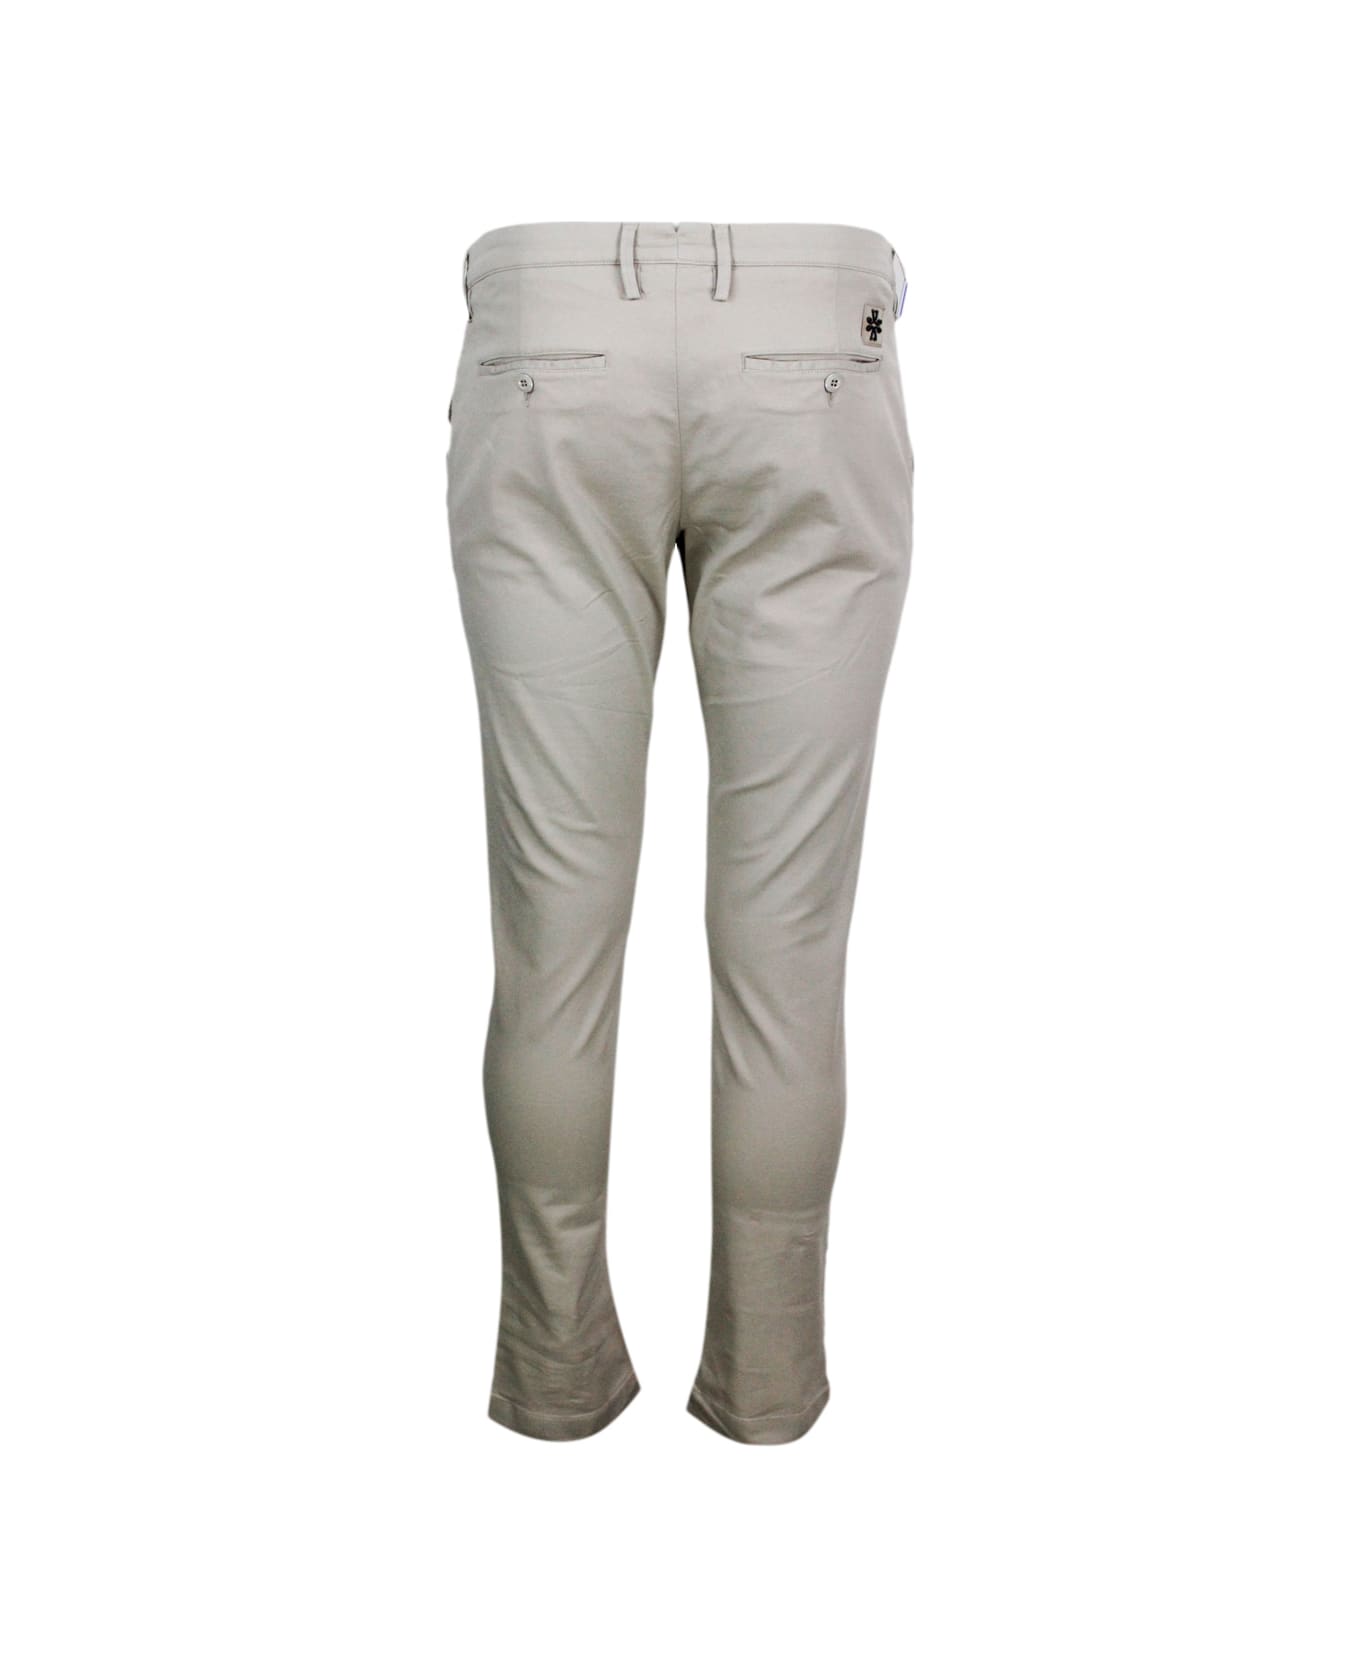 Jacob Cohen Luxury Edition Bobby Chino Trousers In Soft Stretch Cotton With Slant Pockets With Zip And Button Closure And Lacquered Button - Beige